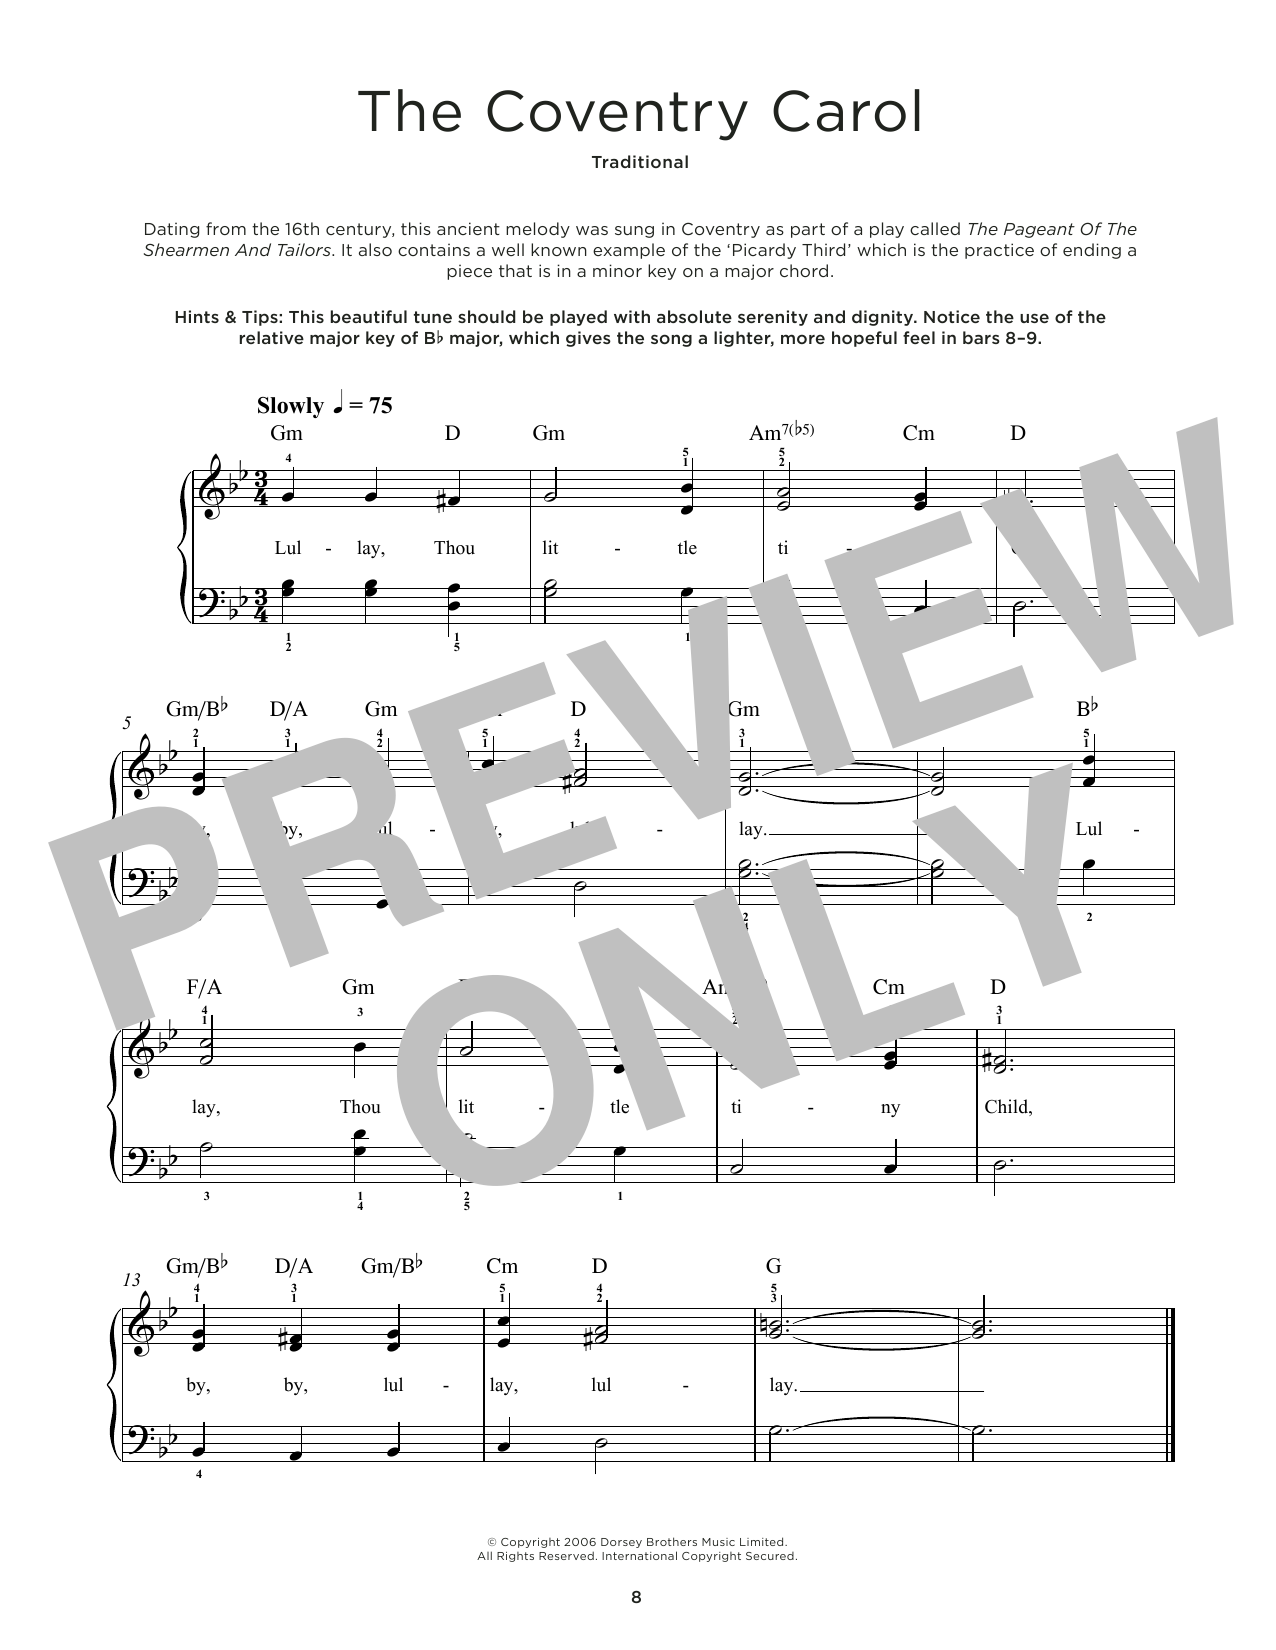 Download Traditional English Melody Coventry Carol Sheet Music